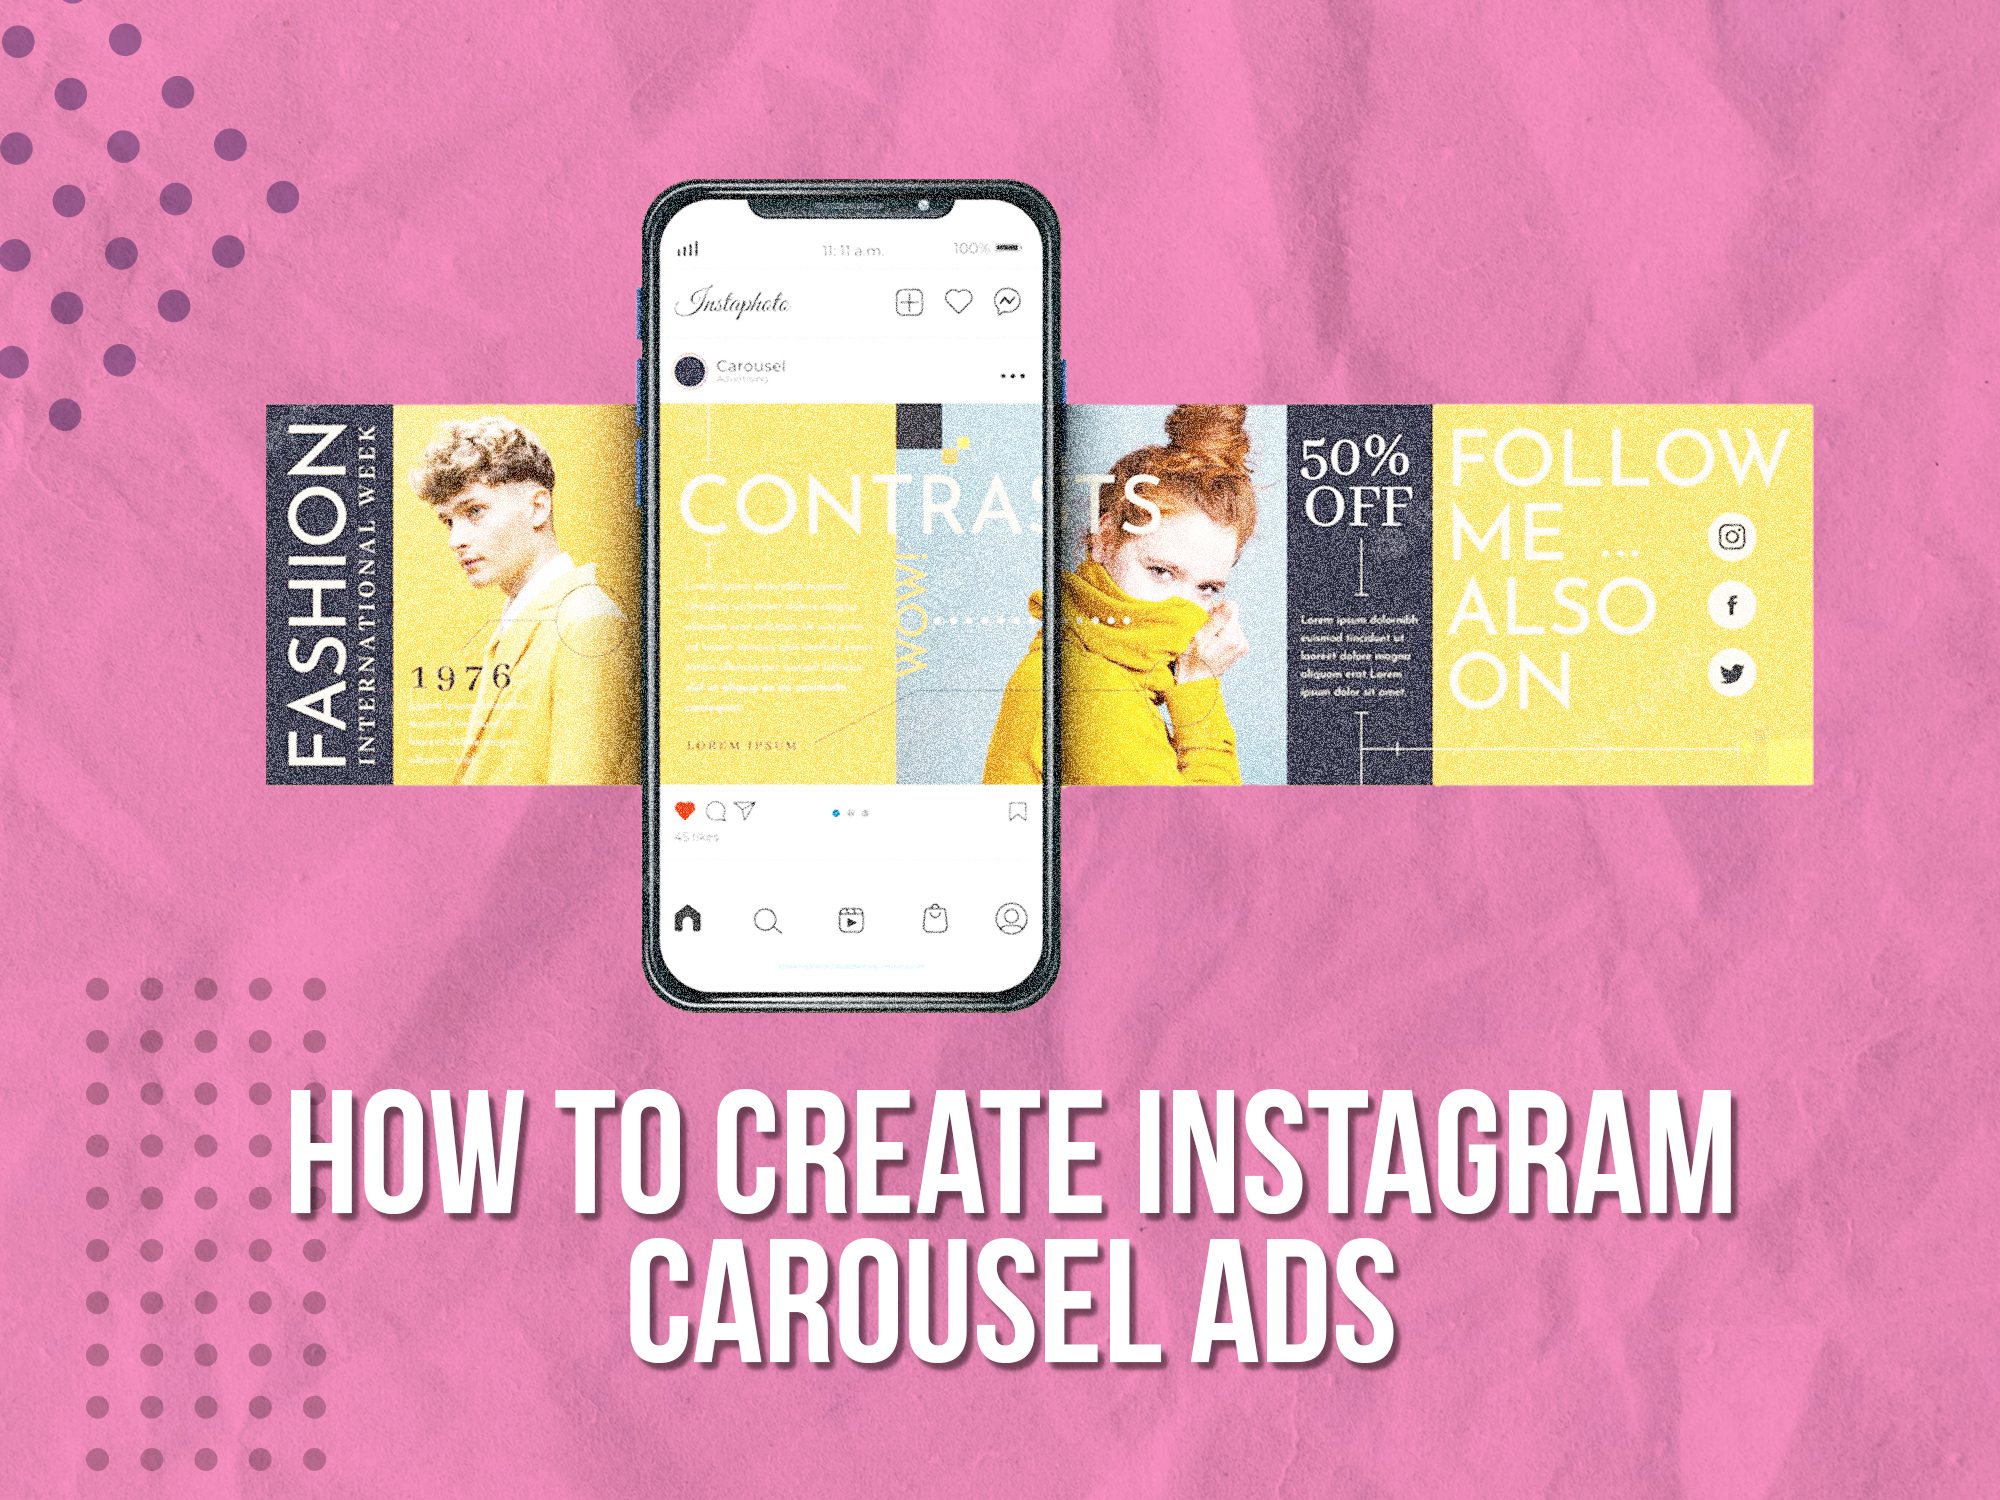 How to Create Instagram Carousel Ads